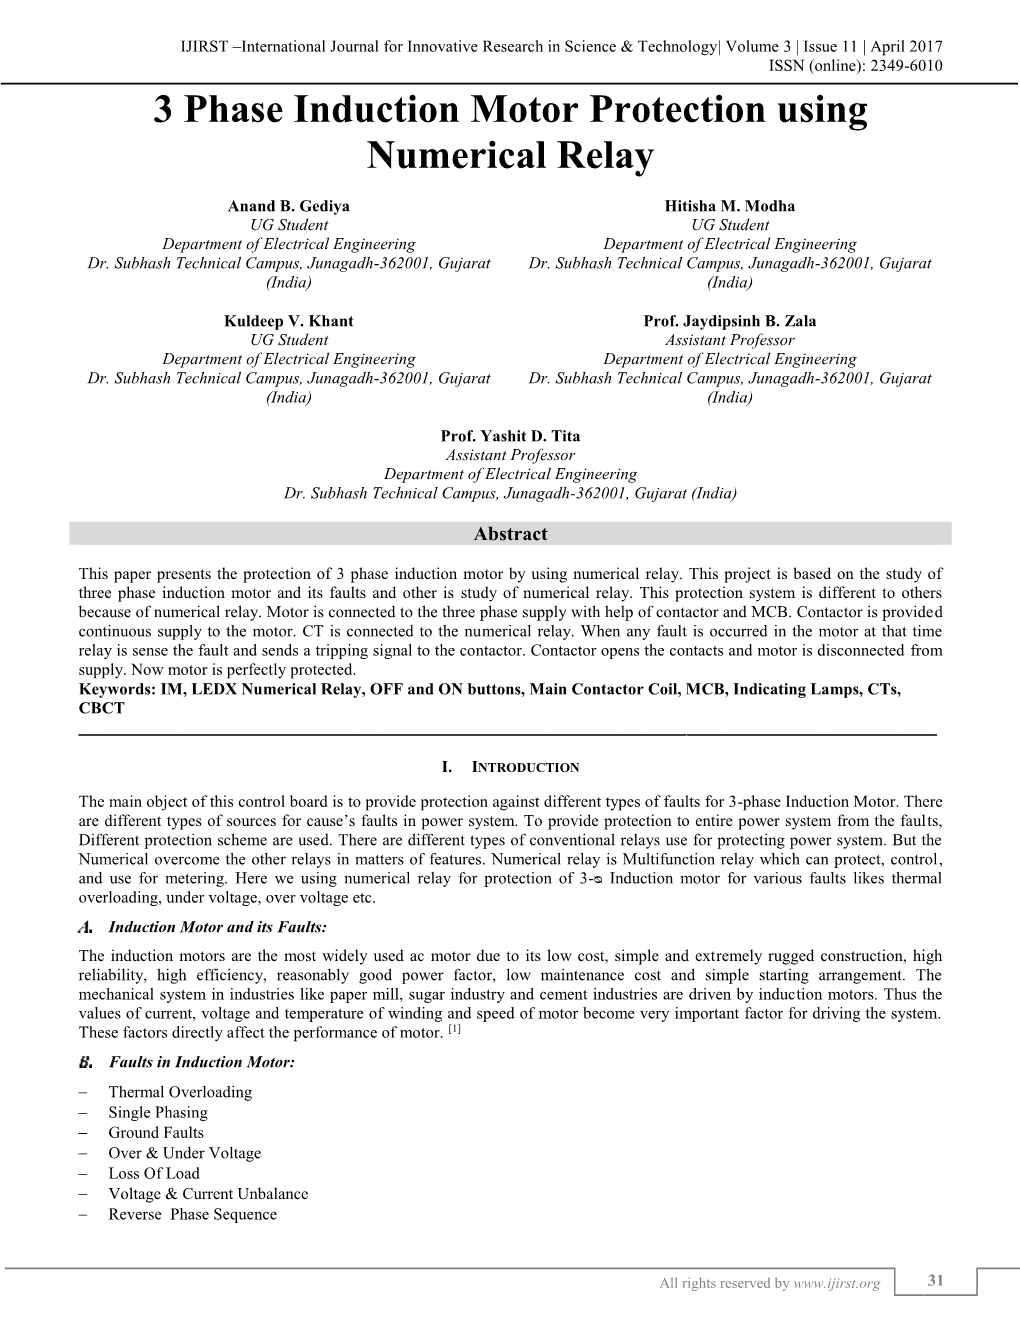 3 Phase Induction Motor Protection Using Numerical Relay (IJIRST/ Volume 3 / Issue 11/ 006)